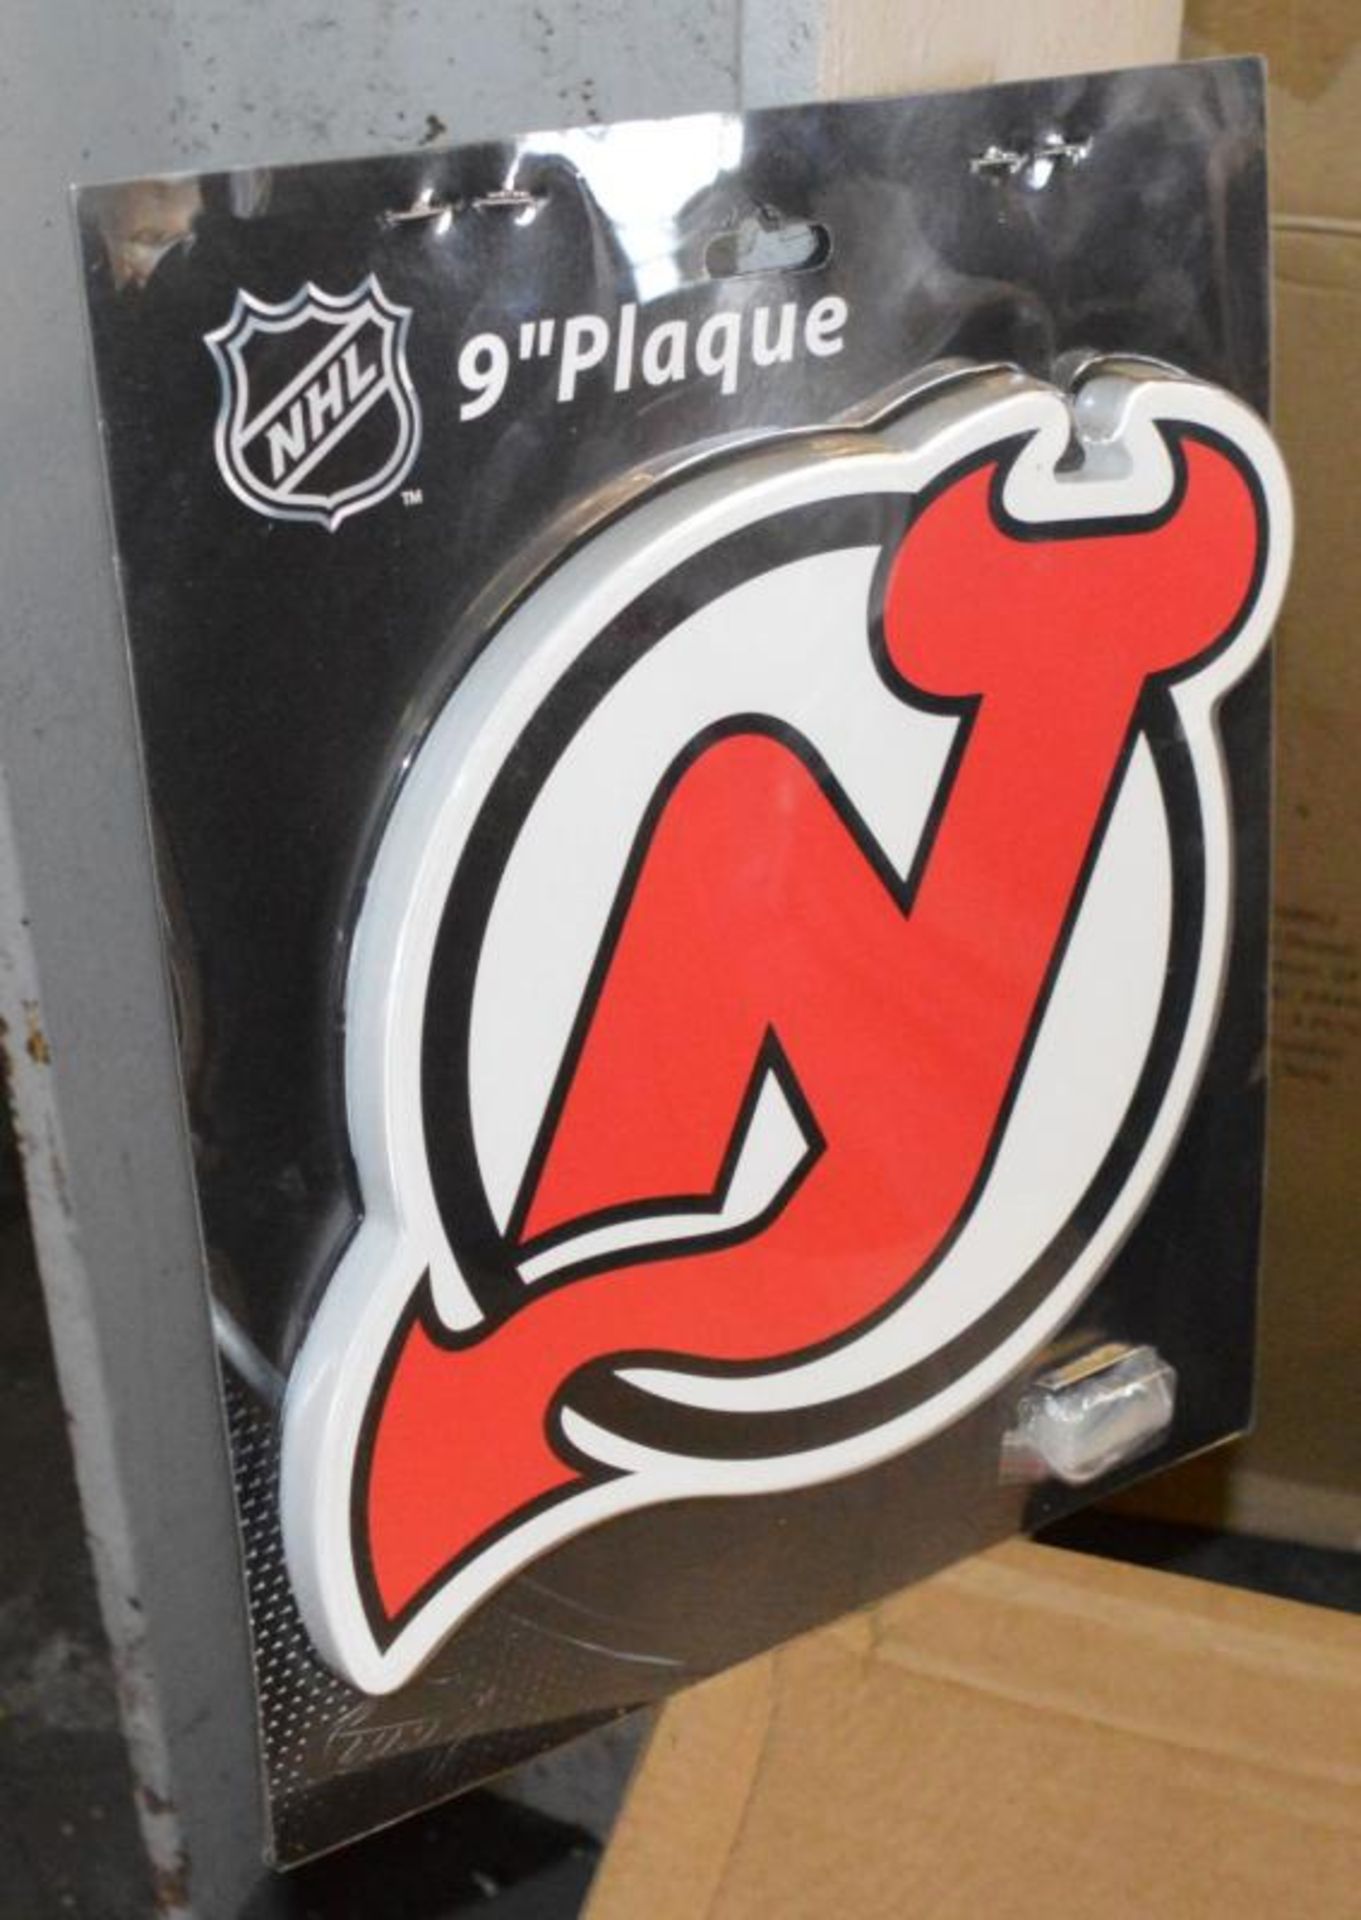 12 x 9"NHL Hockey New Jersey Devils Plaques - New/Boxed - CL185 - Ref: DRT0754 - Location: Stoke-on